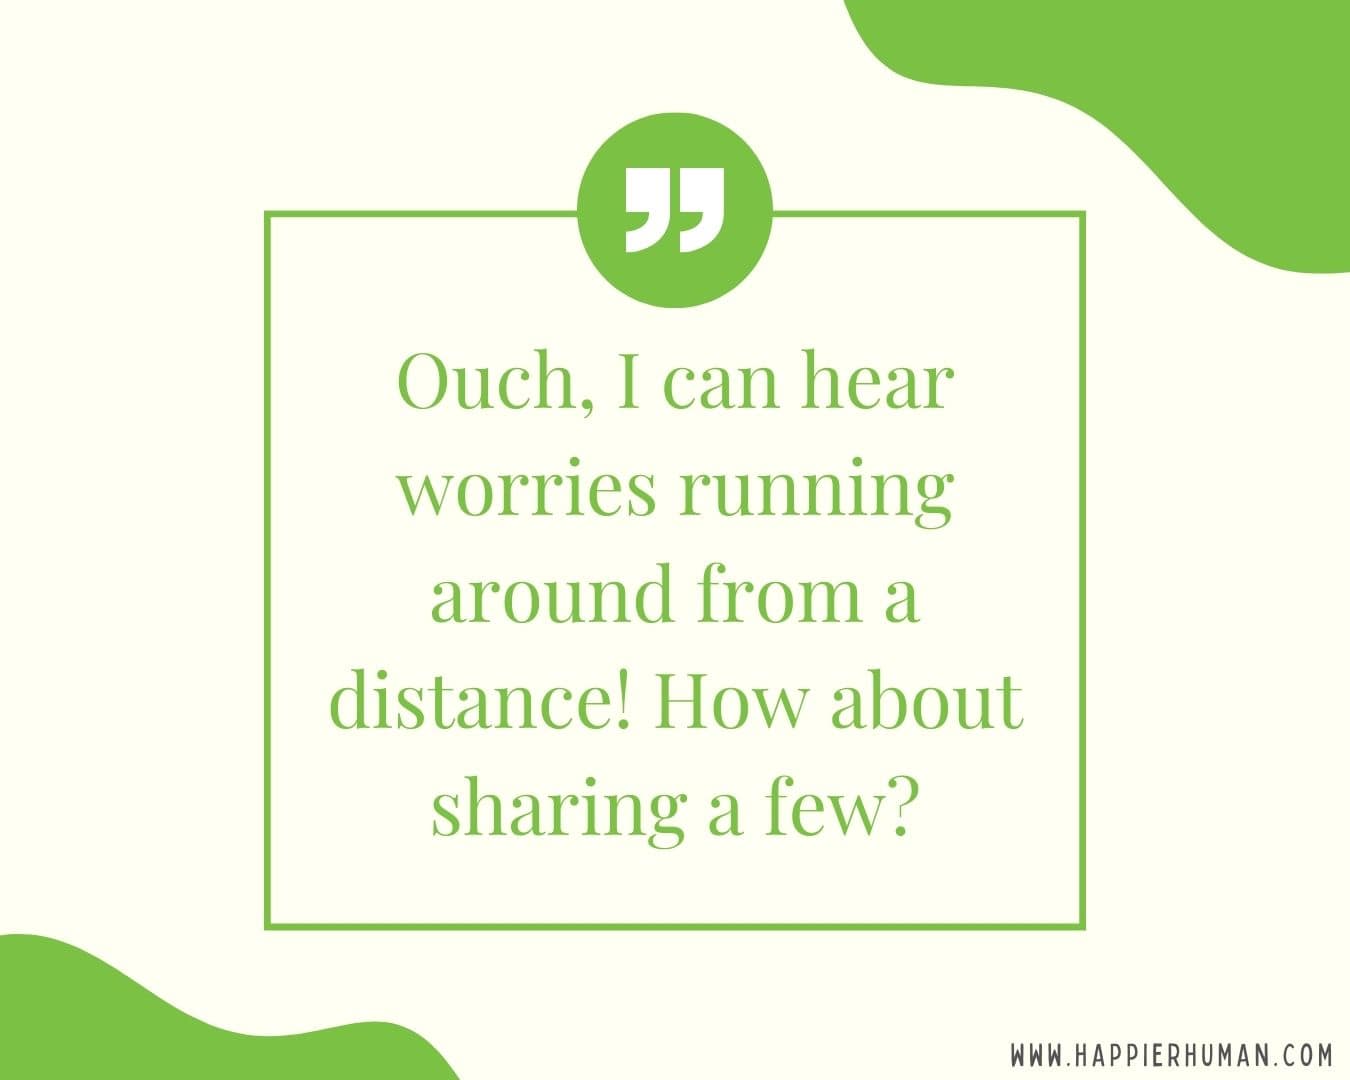 I’m Here for You Quotes - “Ouch, I can hear worries running around from a distance! How about sharing a few?”